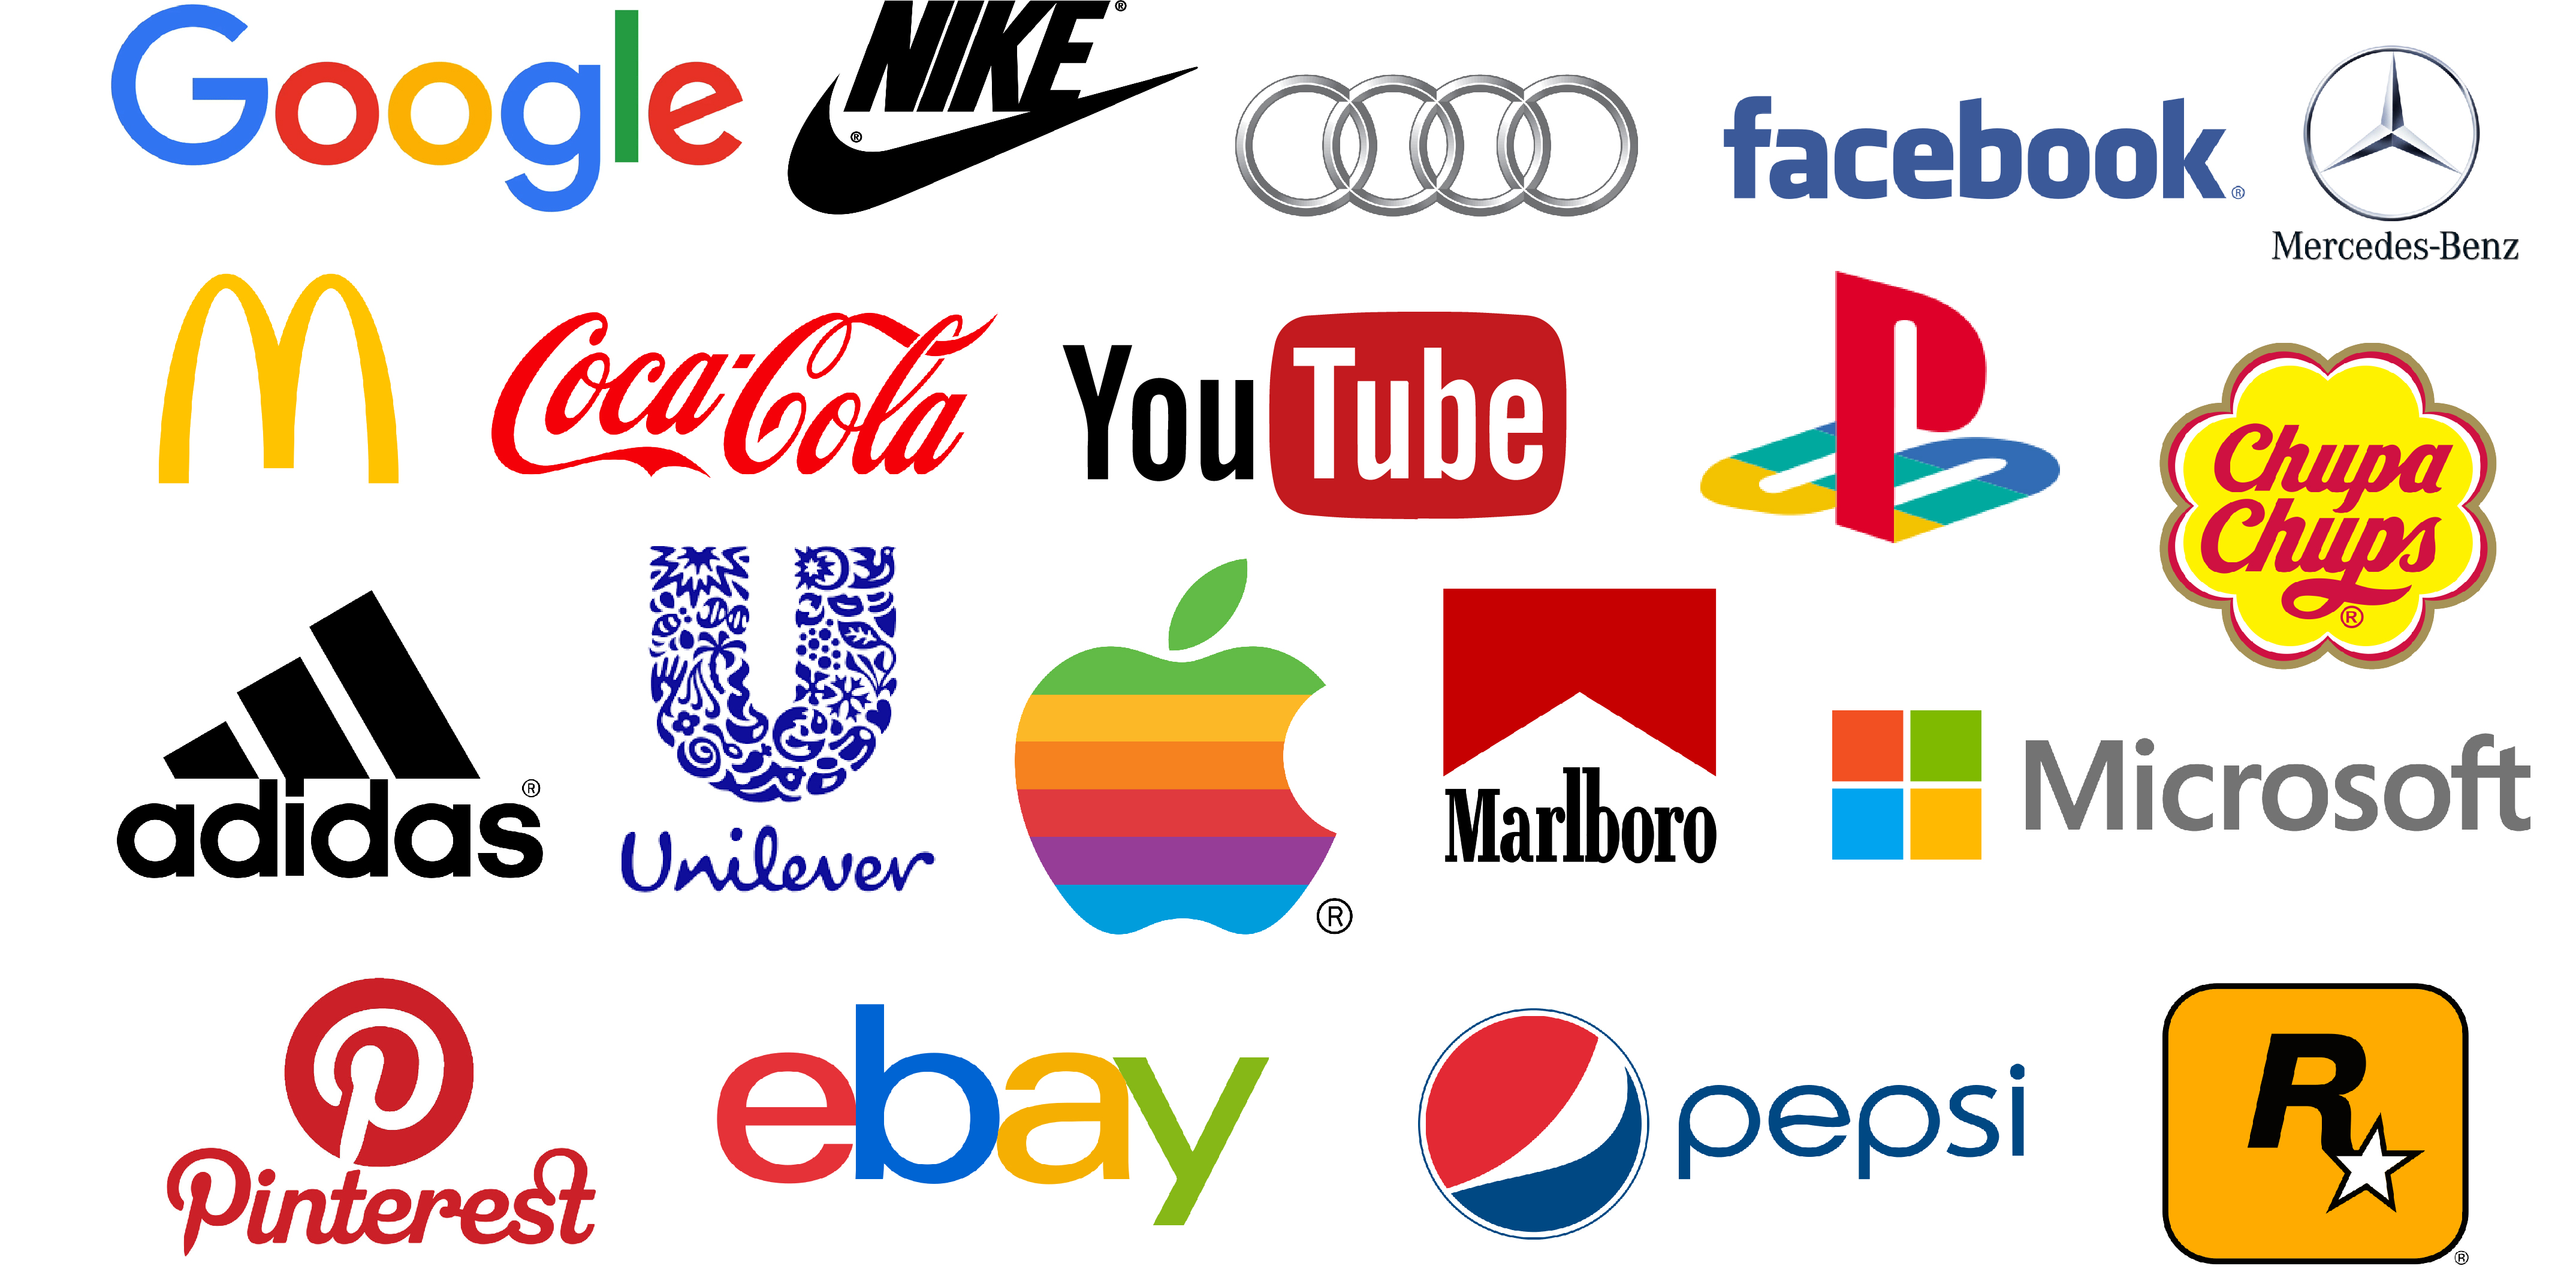 Top tips for picking the perfect brand name - Blog | Go Media